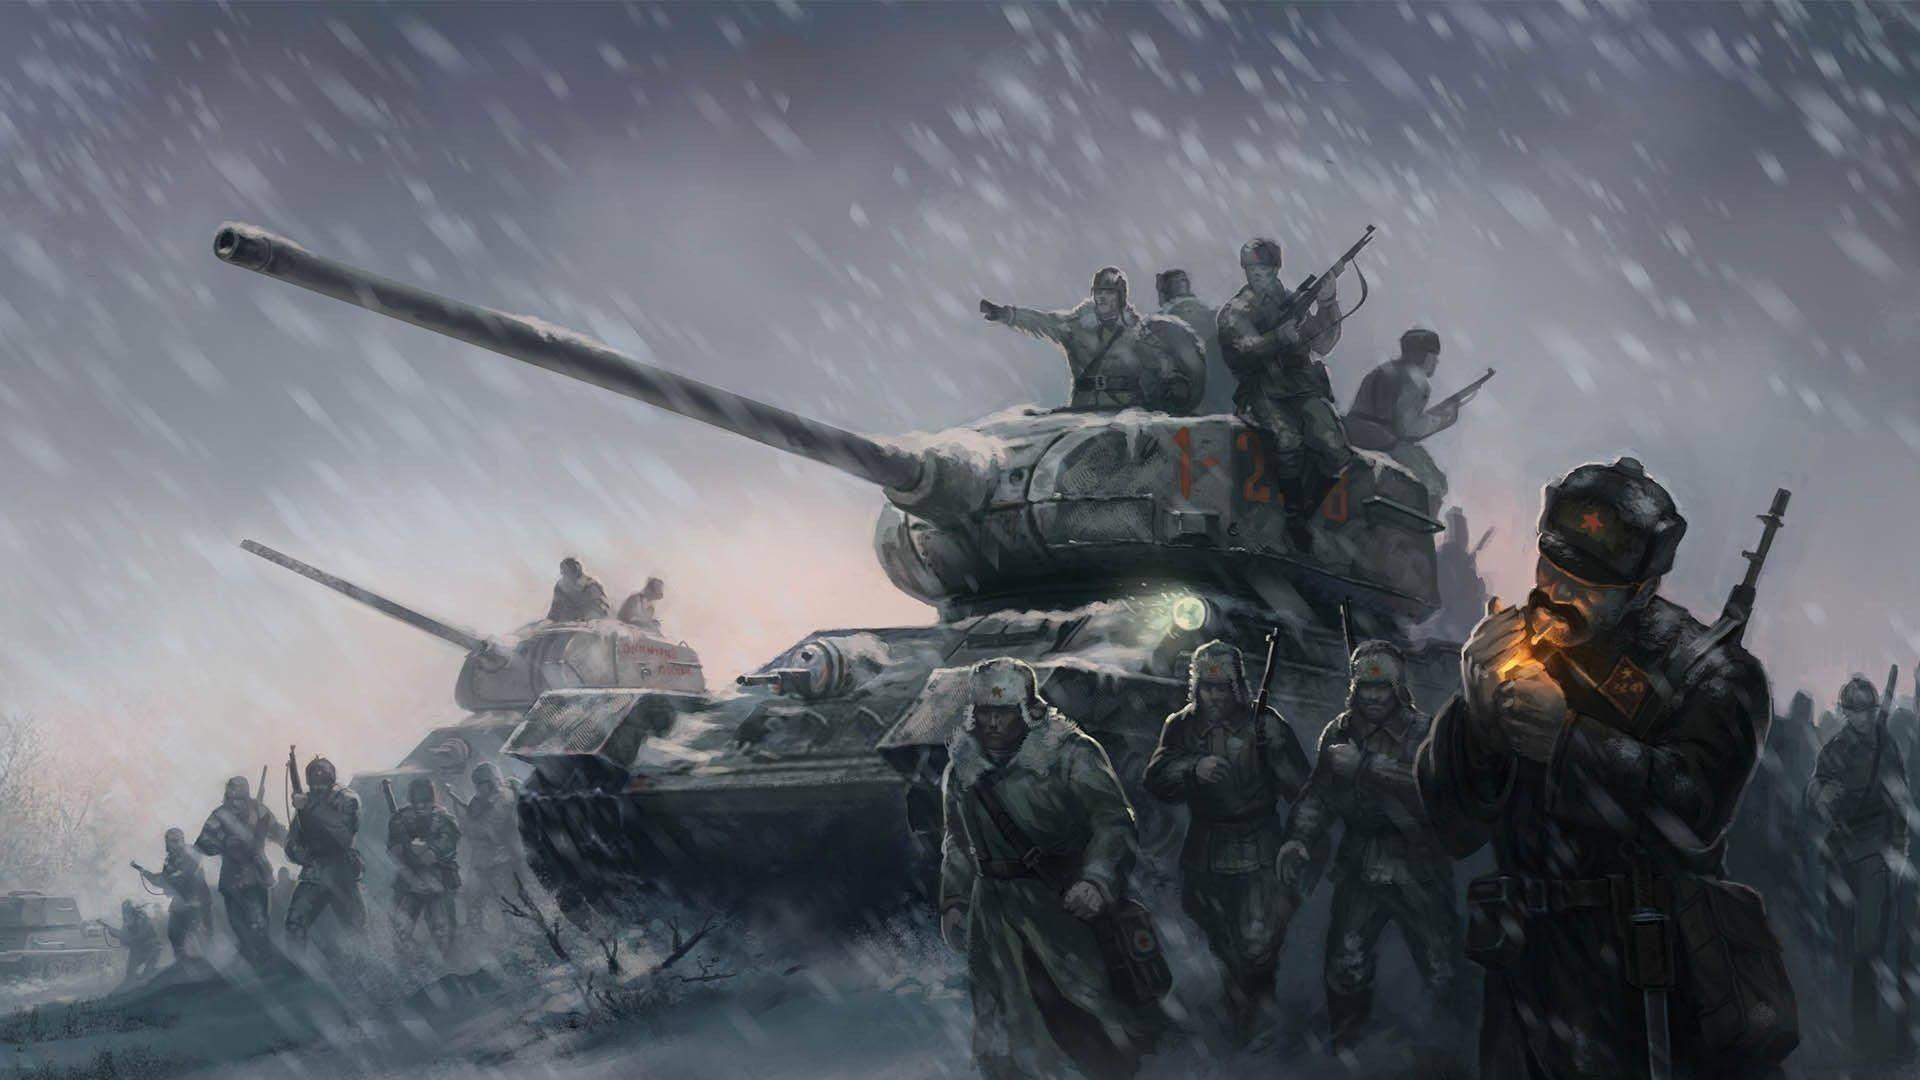 Armies In A Snowy Place Background